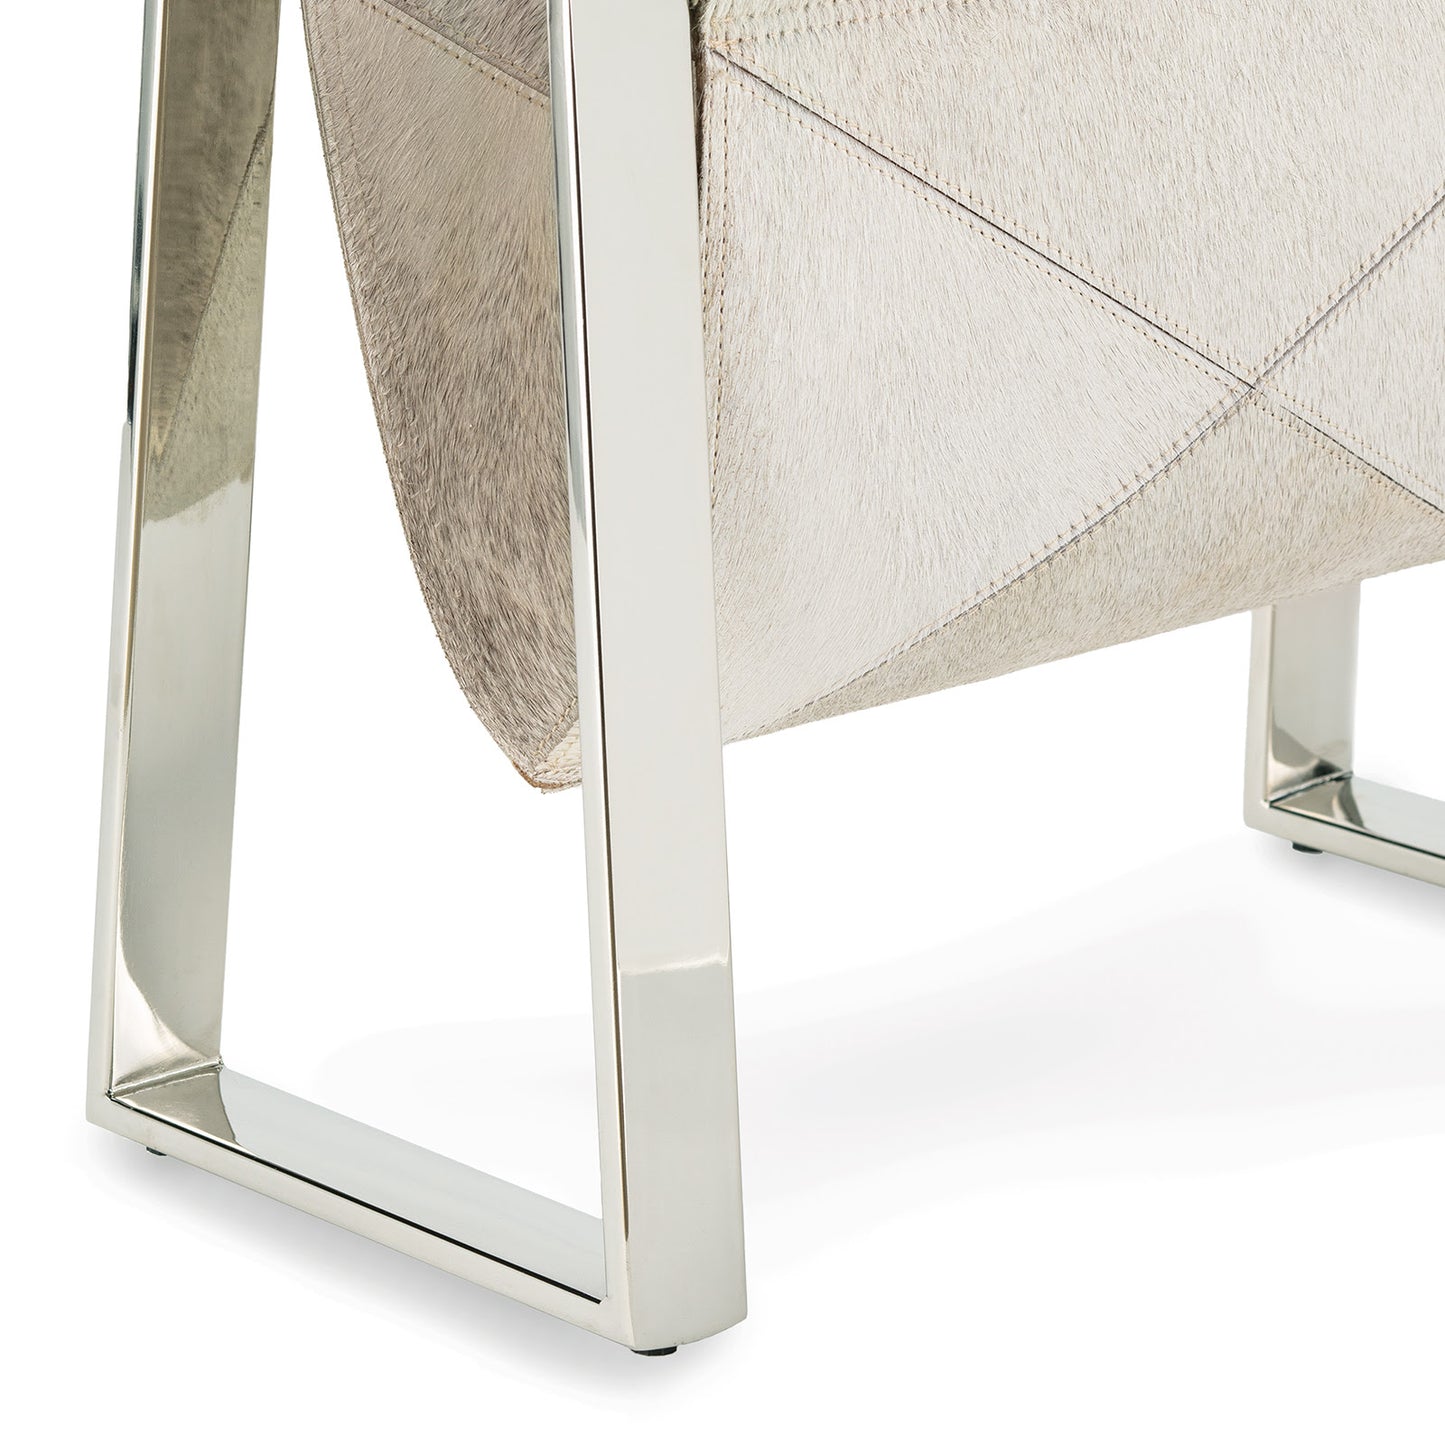 Andres Hair on Hide Magazine Rack in Polished Nickel by Regina Andrew